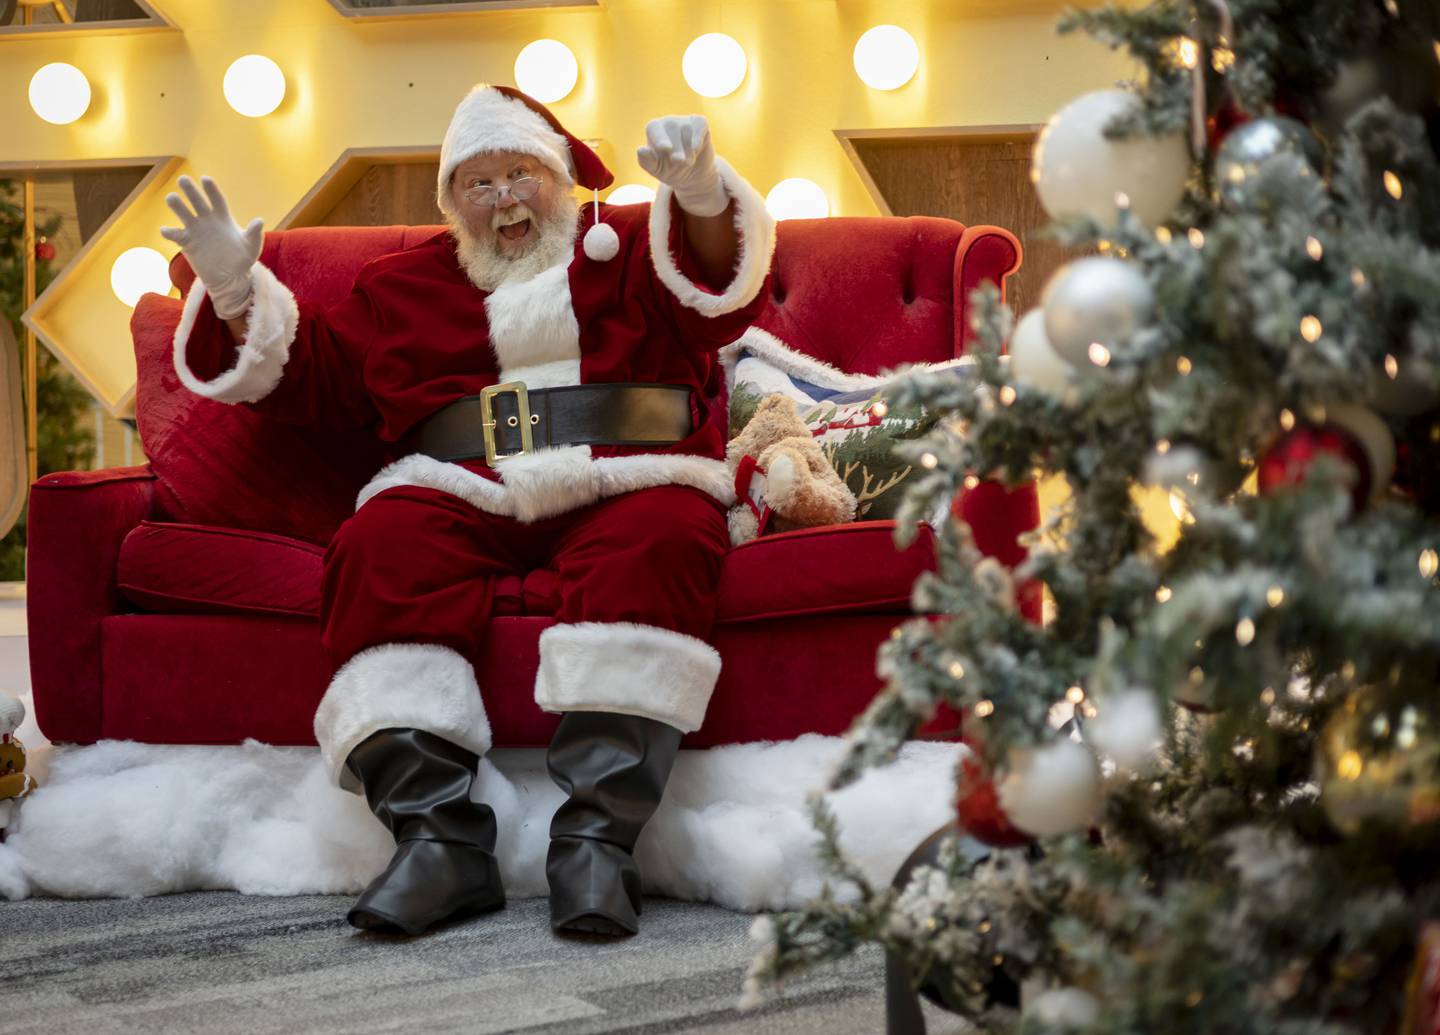 Jacob Nash as Santa Claus waves to visitors on Dec. 13, 2022, at Chicago Ridge Mall. As a trans Santa, Nash believes inclusion is inherent in the message of Santa itself. His “unapologetic” representation of the LGBTQ community has resonated with many.